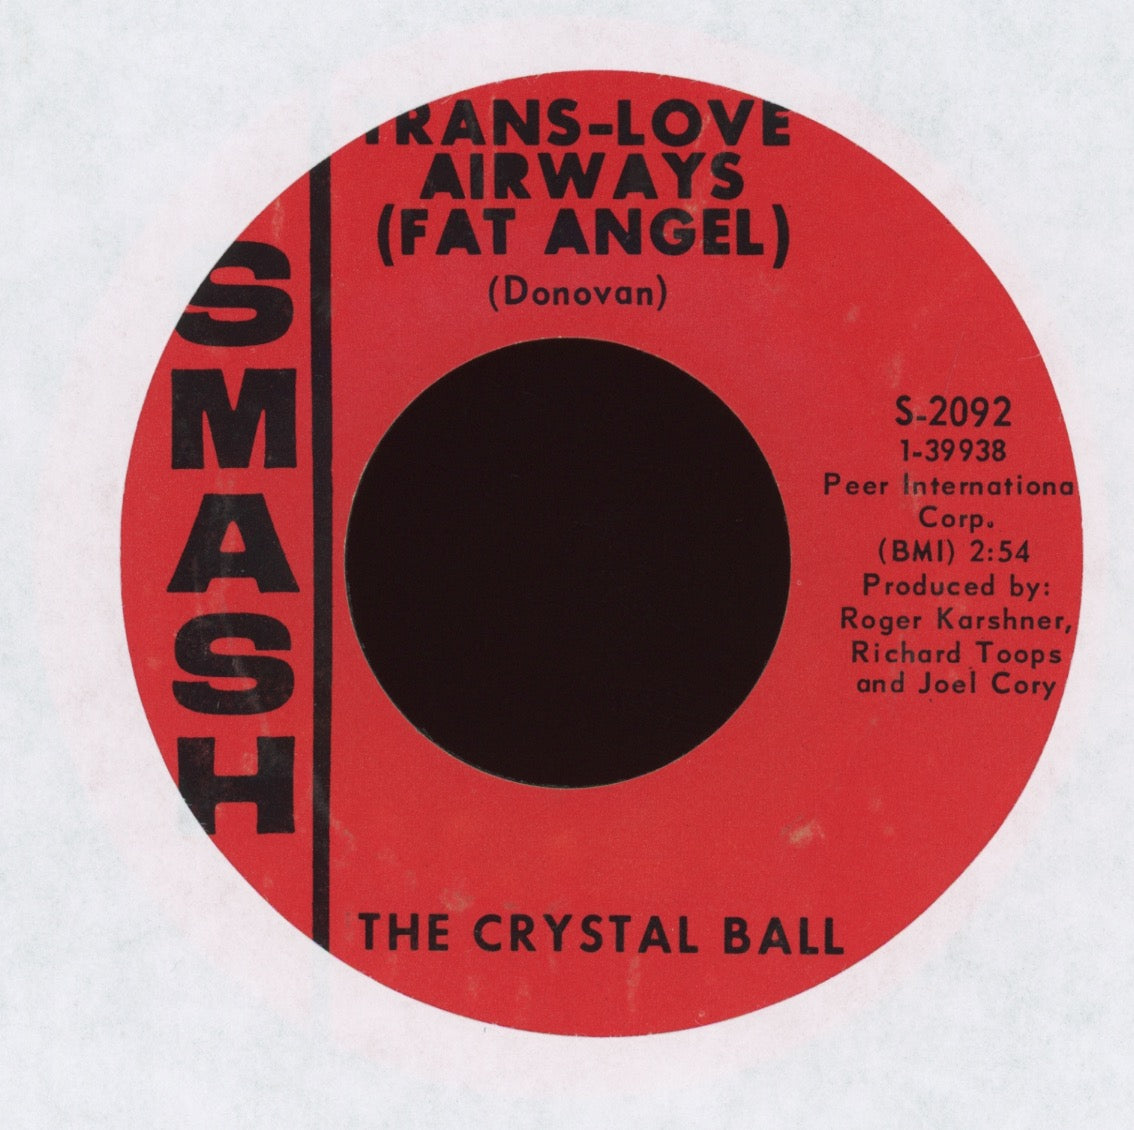 The Crystal Ball - Trans-Love Airways (Fat Angel) on Smash